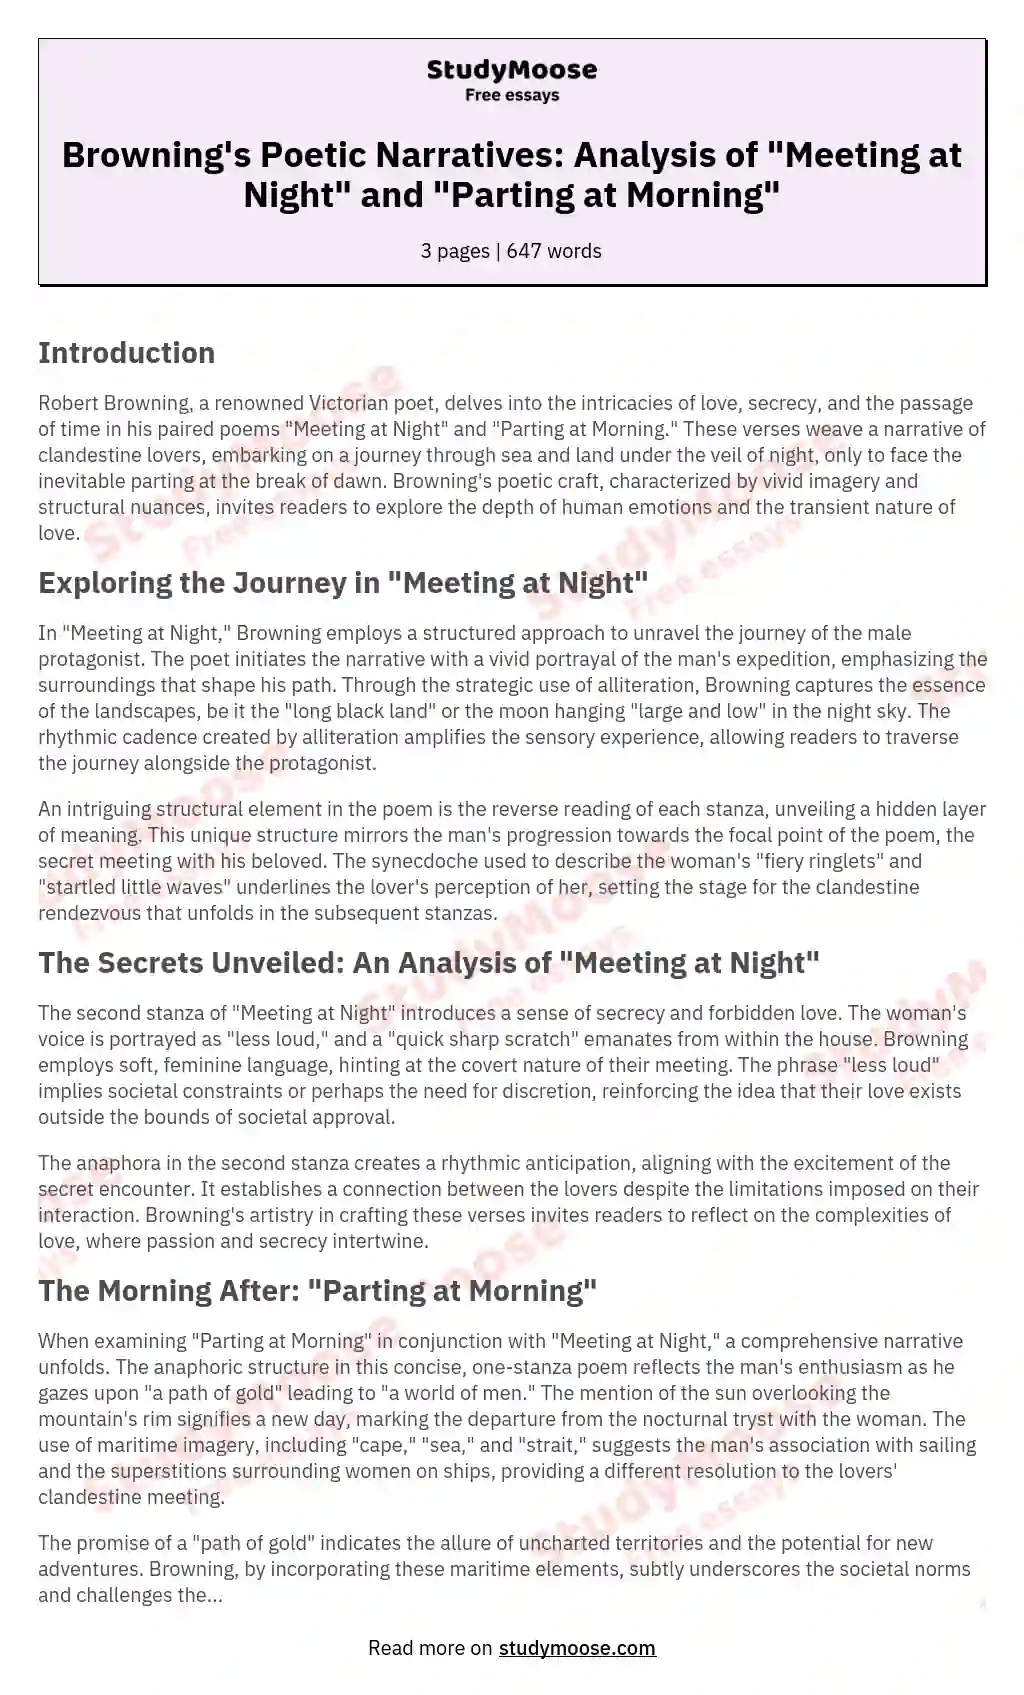 Browning's Poetic Narratives: Analysis of "Meeting at Night" and "Parting at Morning" essay